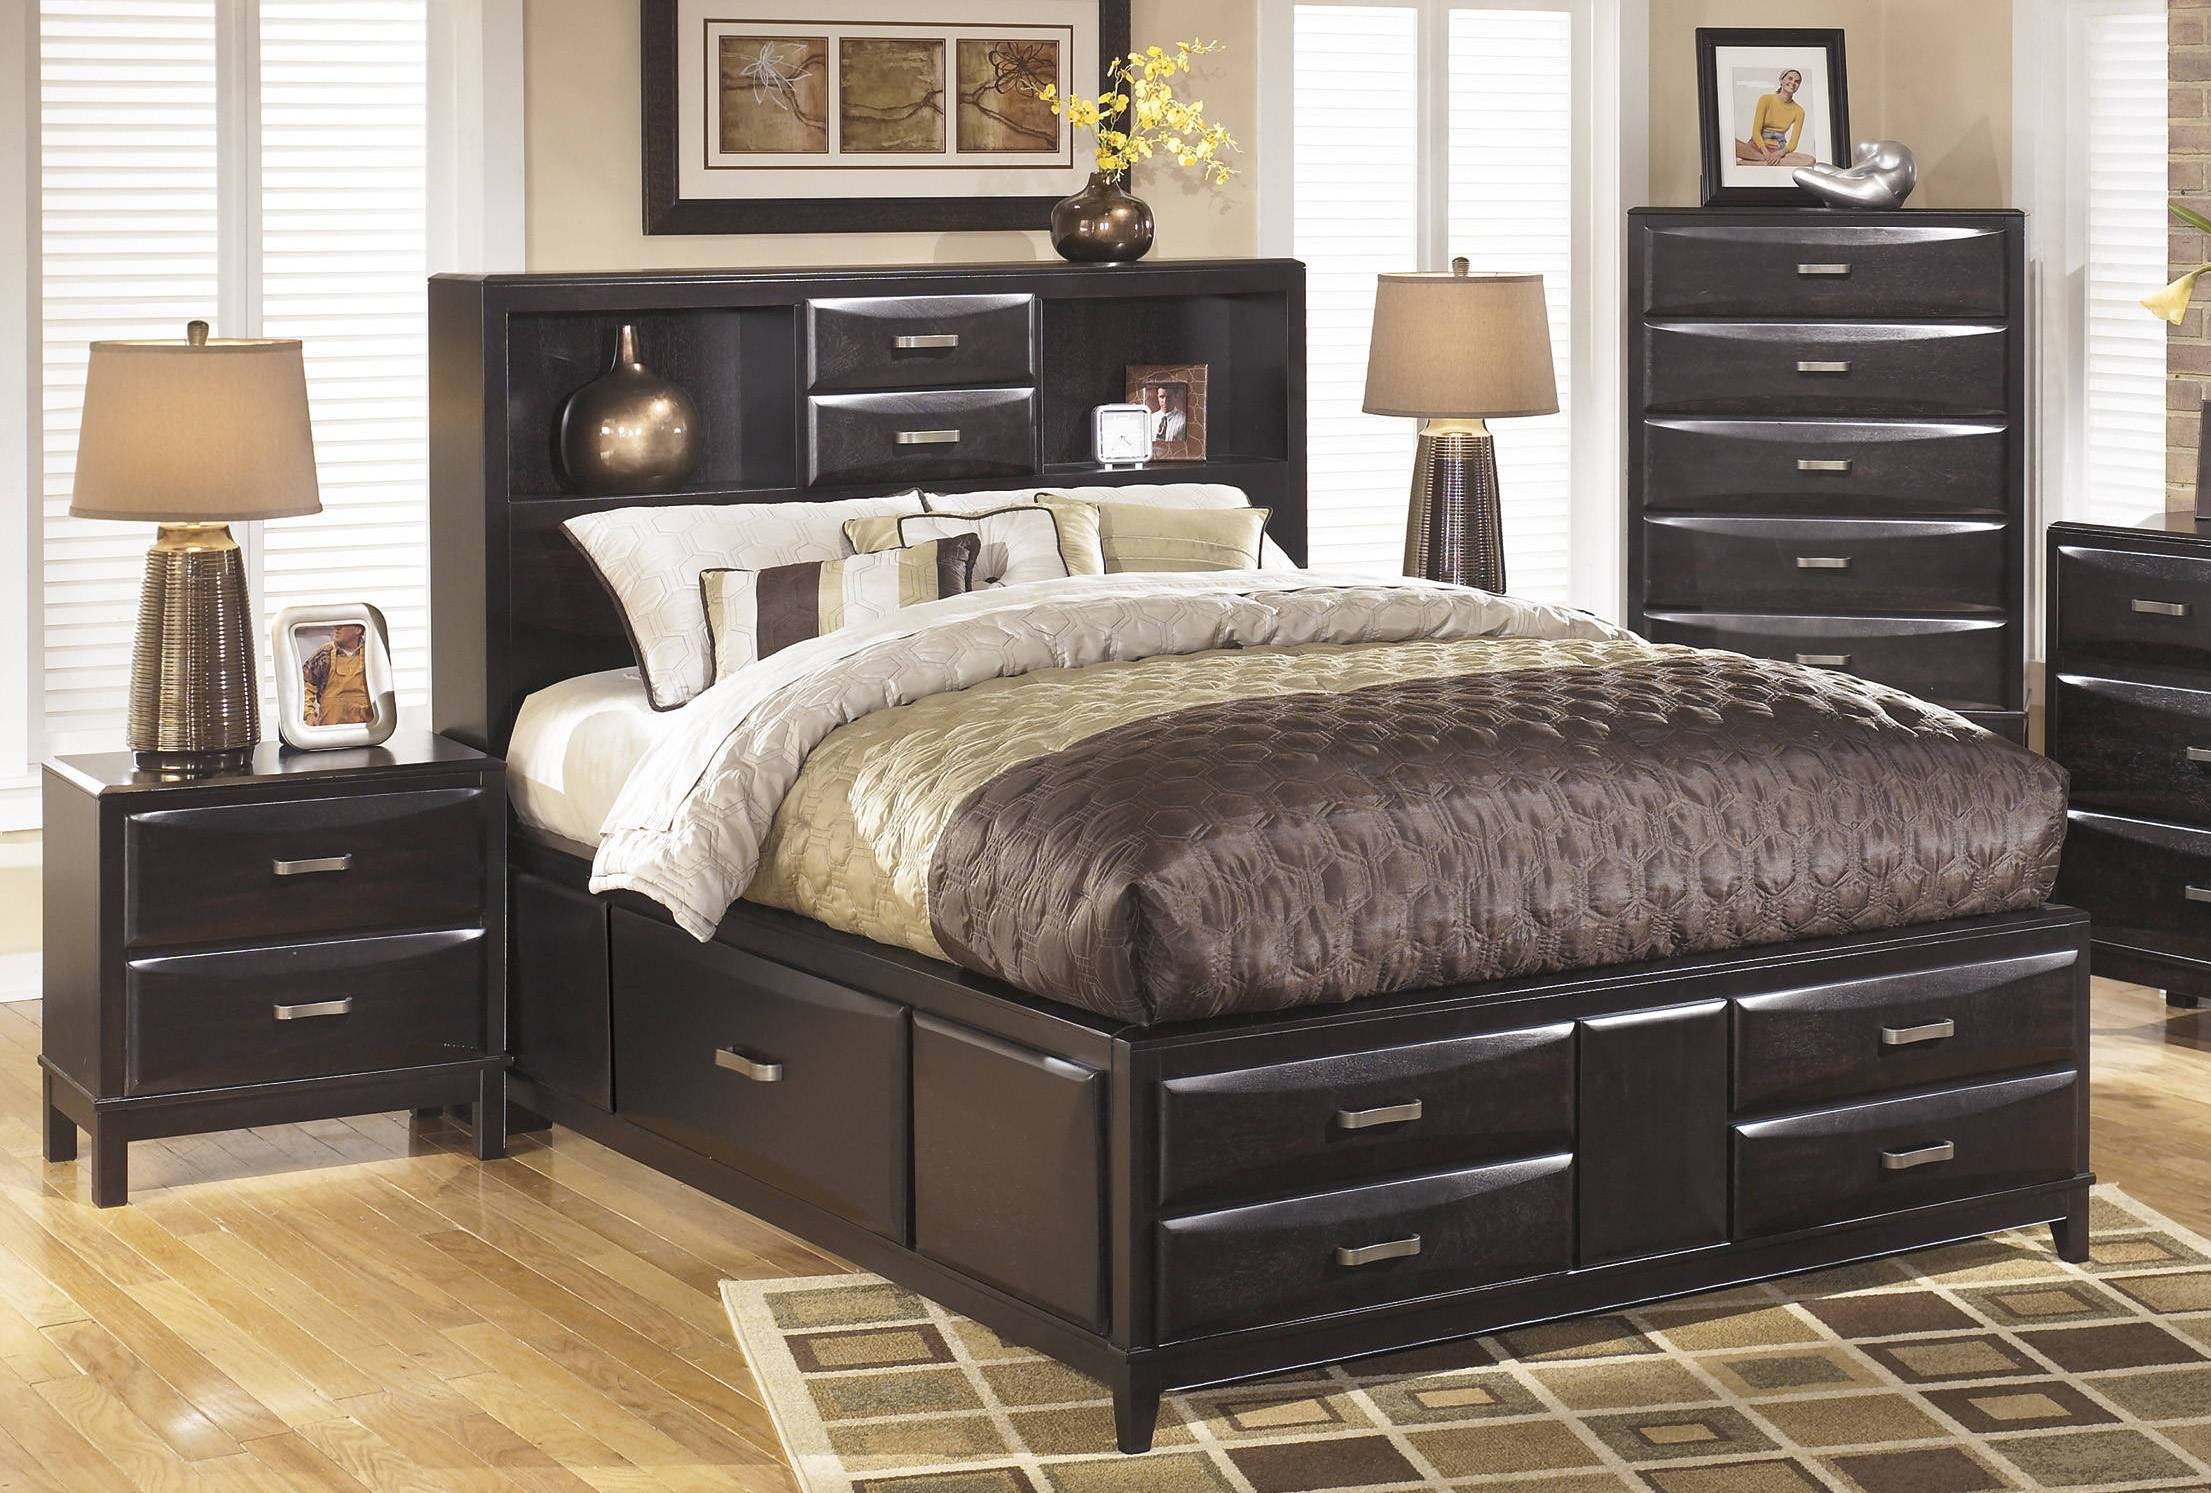 Queen Bedroom Sets With Storage
 Ashley Furniture Kira 2pc Bedroom Set with Queen Storage